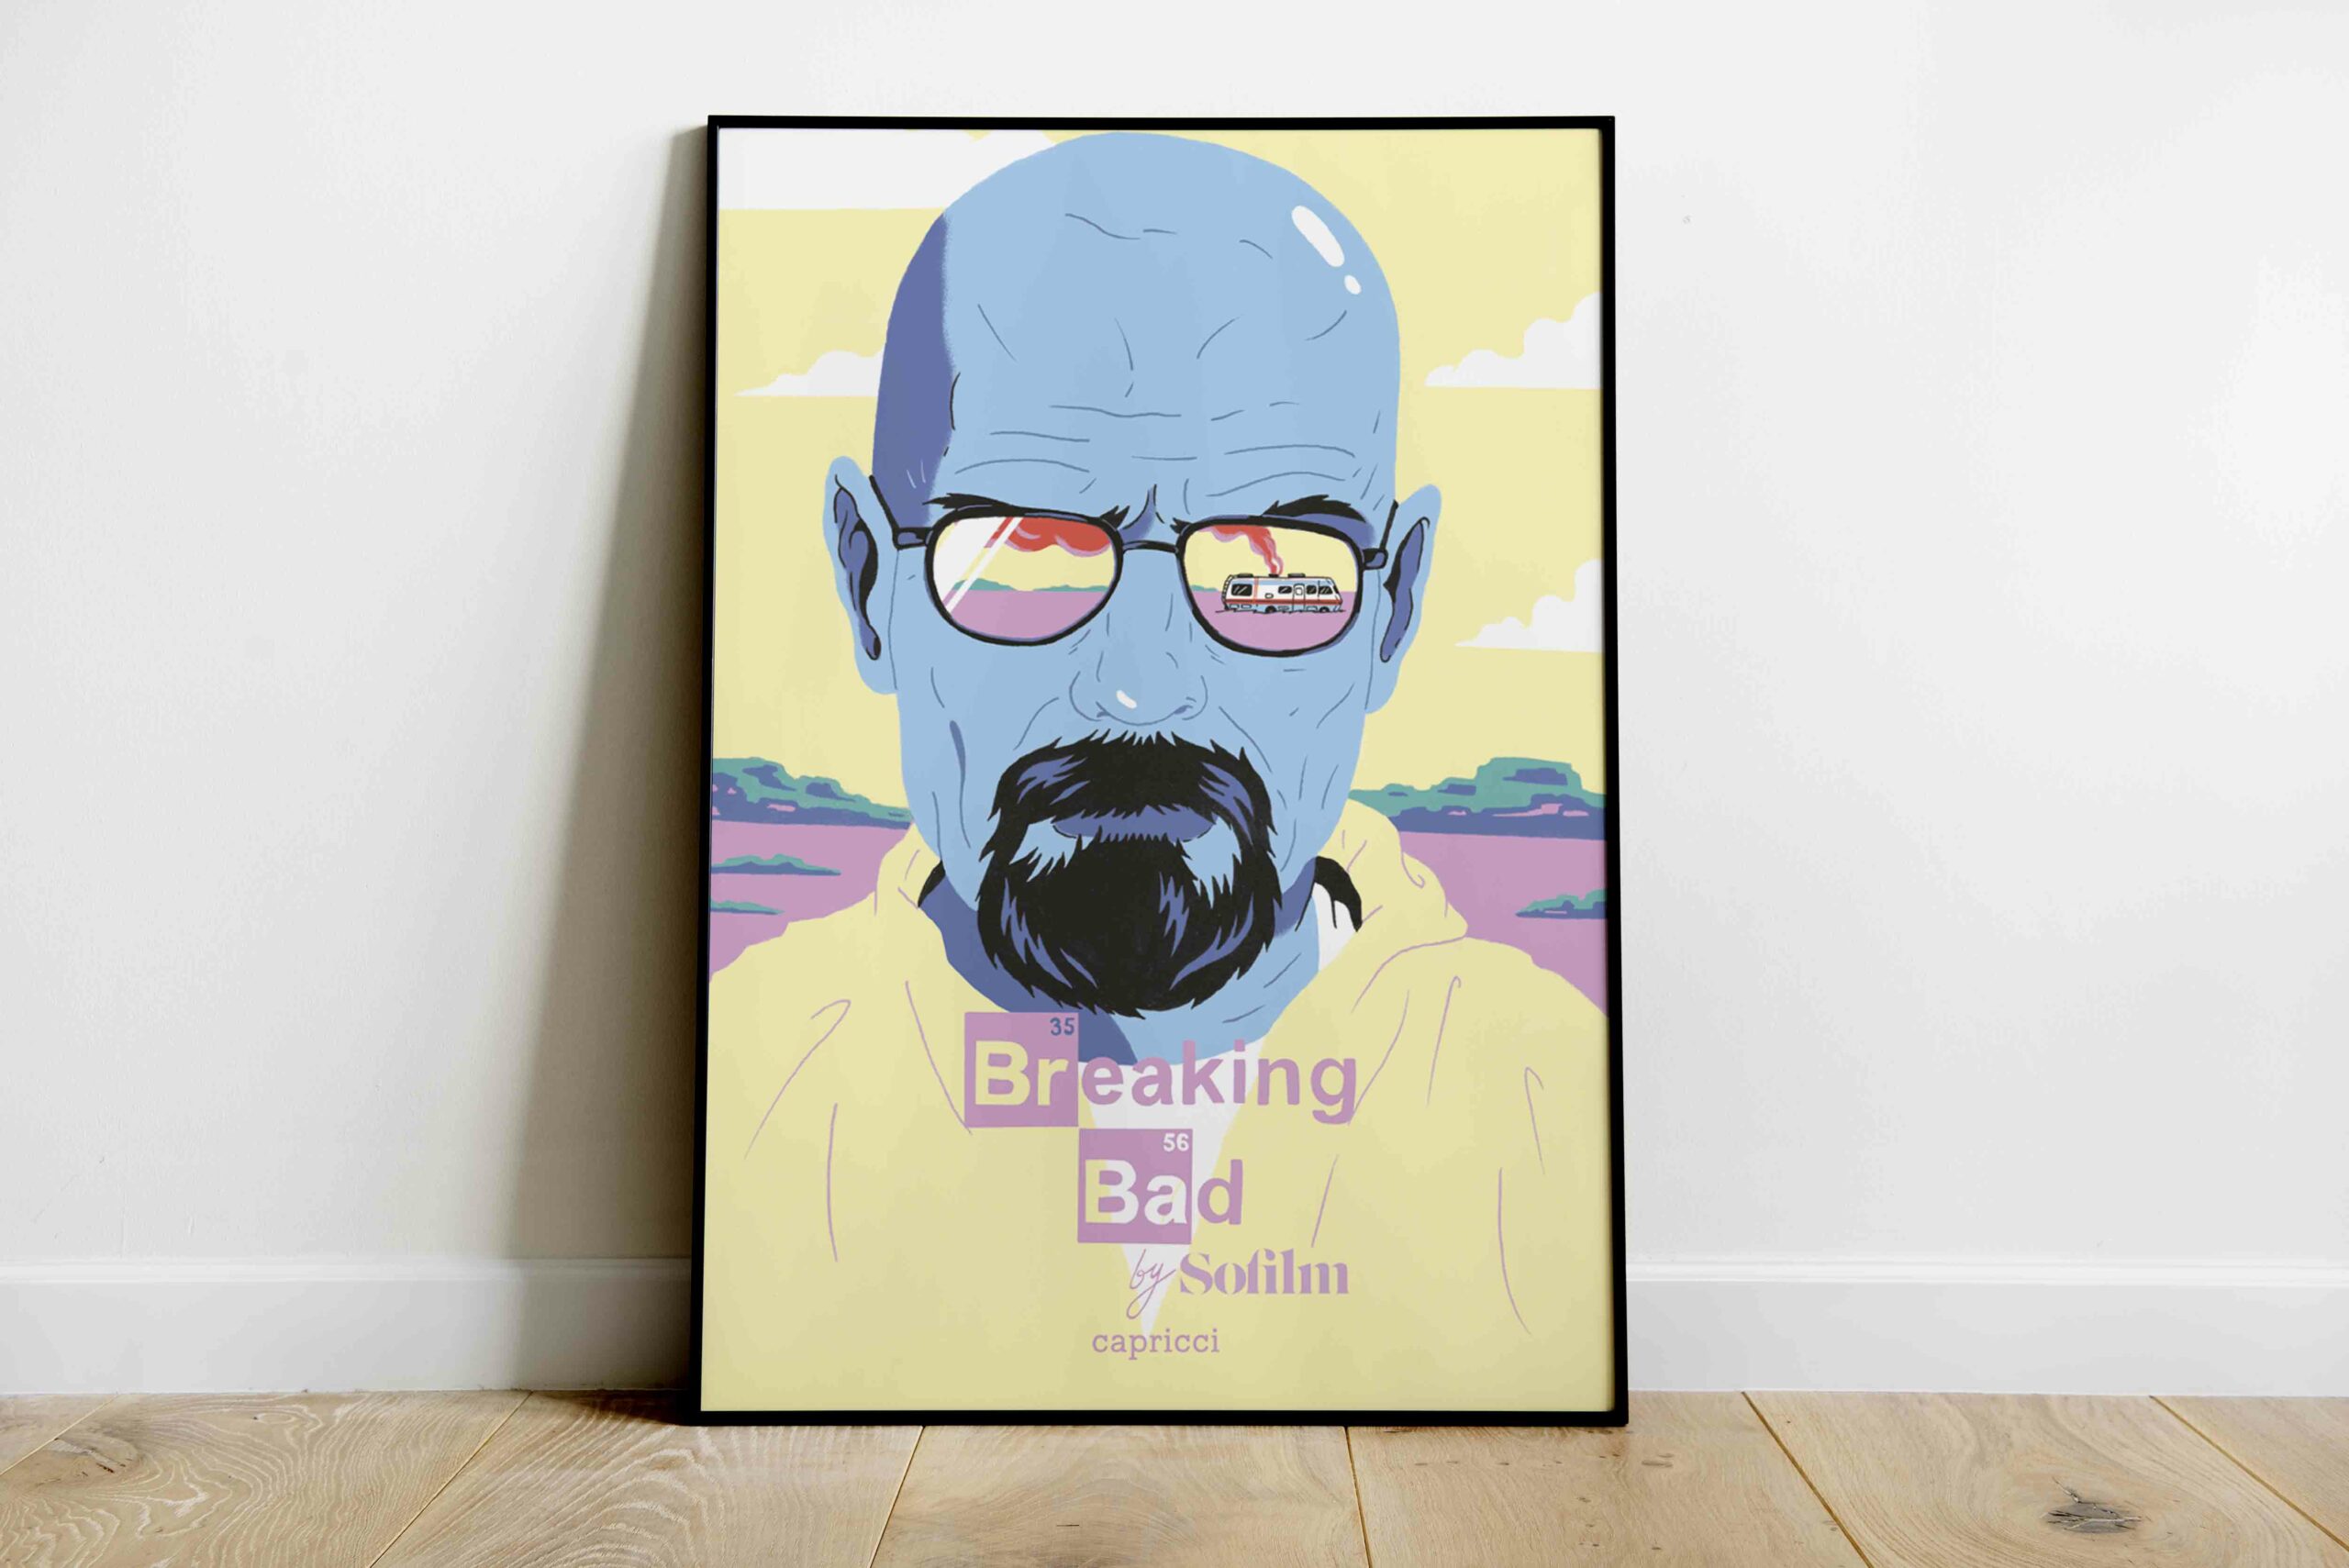 Affiche collector BREAKING BAD by Sofilm - sofilm